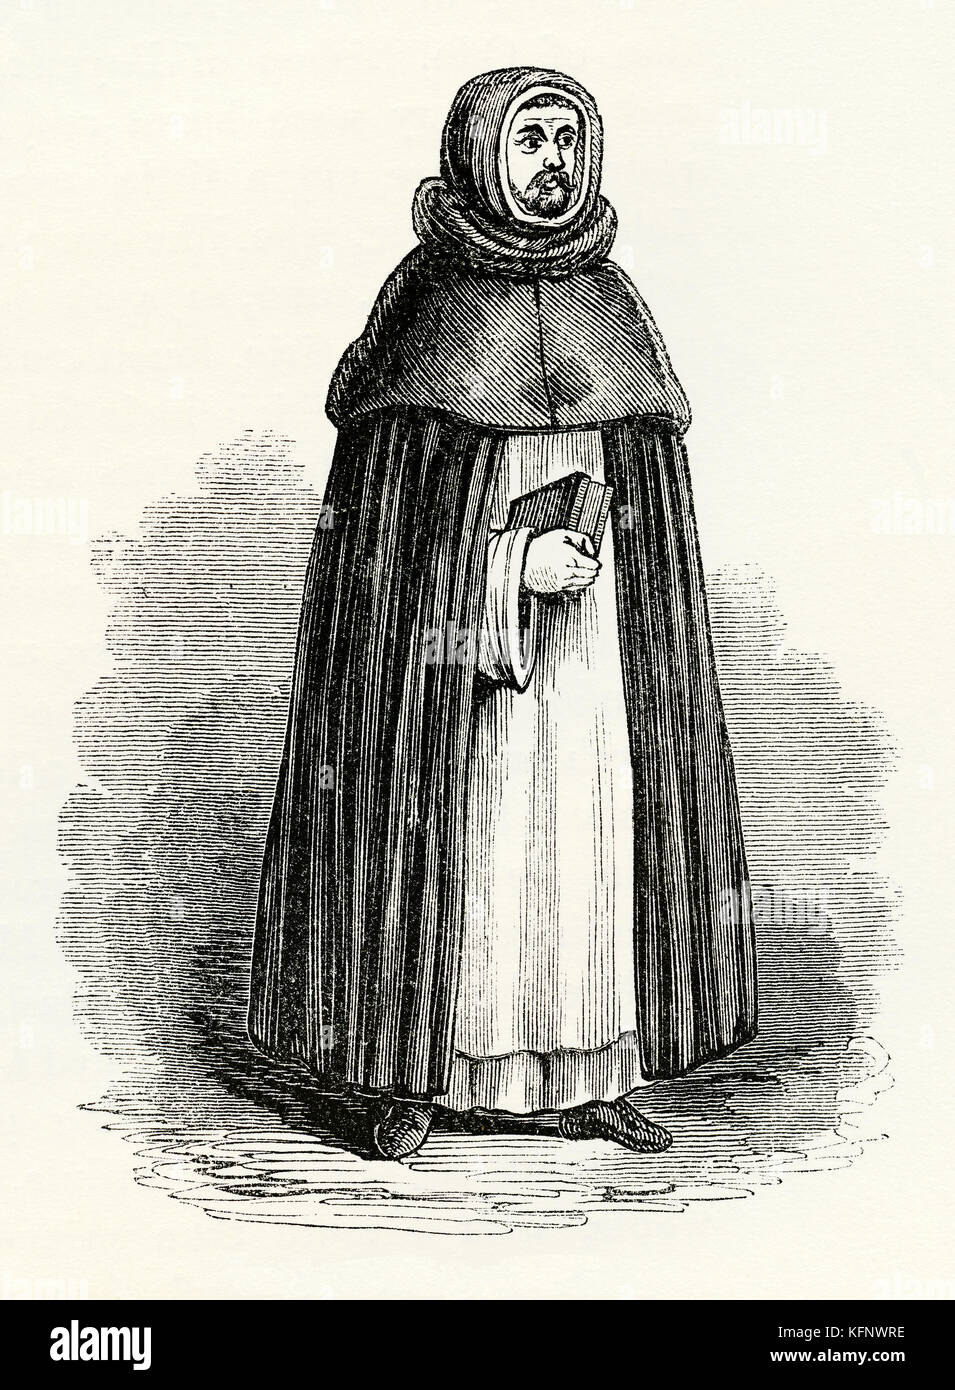 An old engraving depicting a Blackfriars monk in Medieval times. In England and other countries the Dominican friars are referred to as 'Black Friars' because of the black cappa or cloak they wore over their white habits. Stock Photo